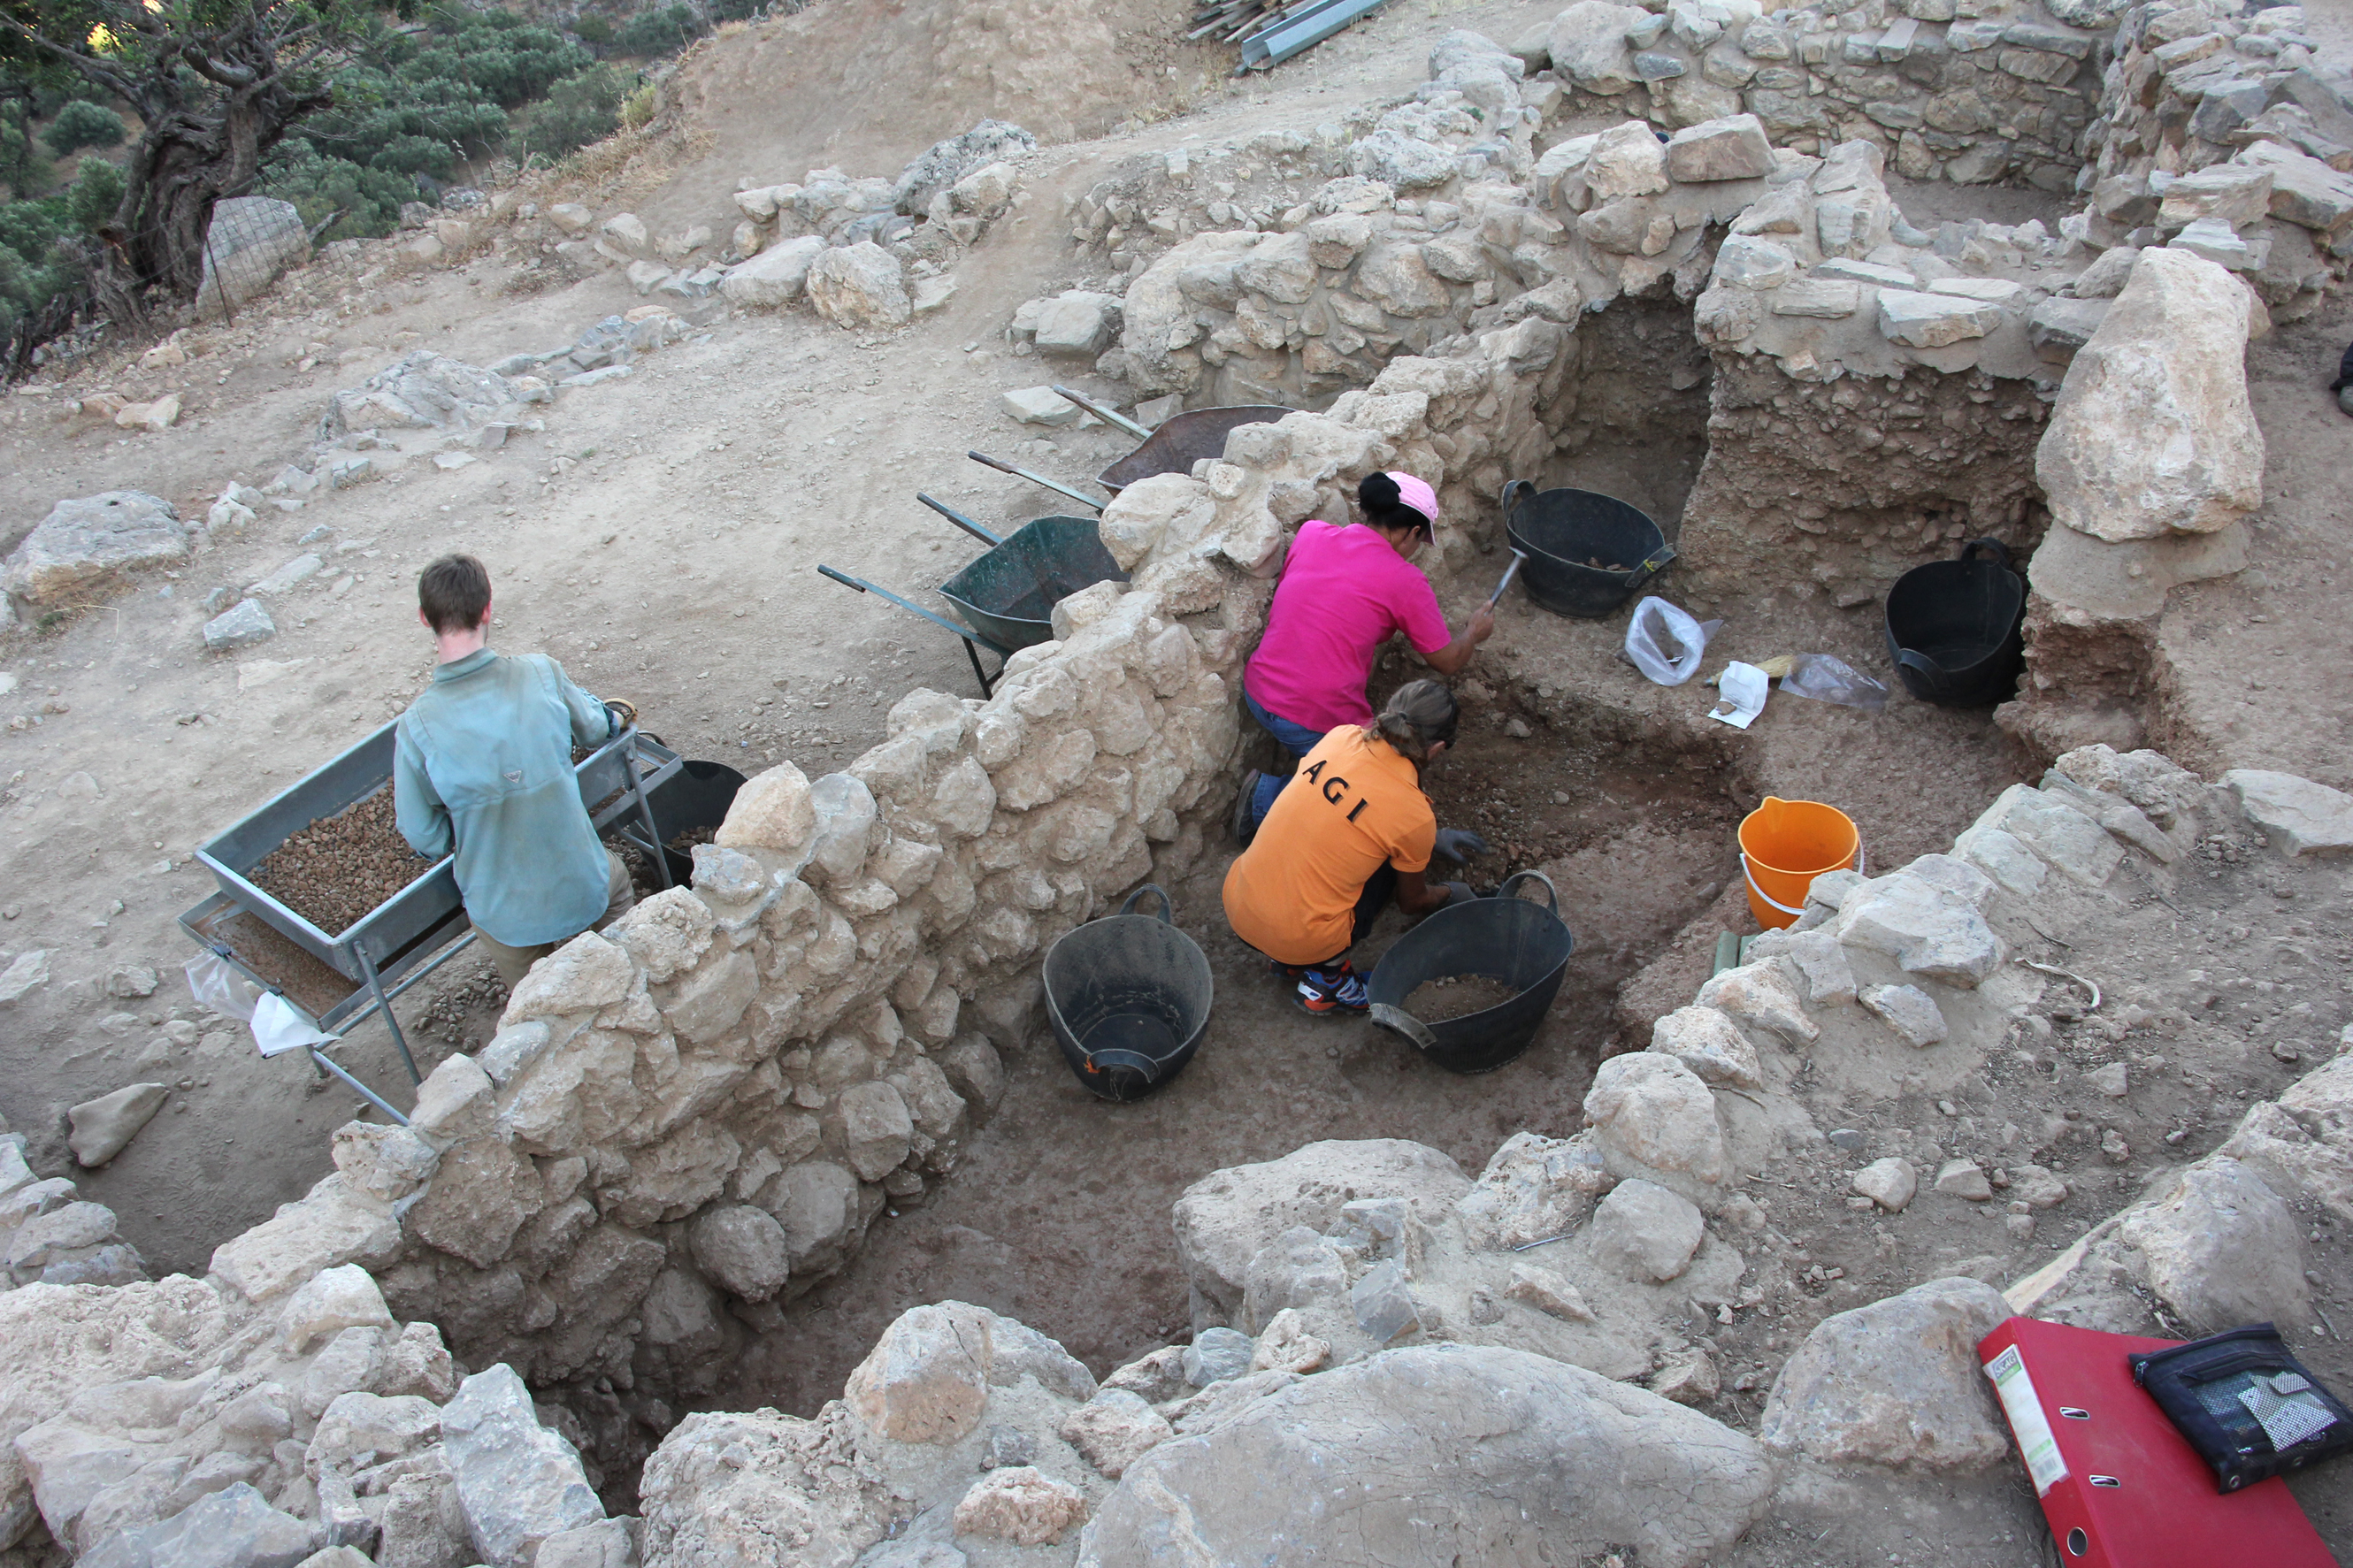 Professor Donald Haggis leads ongoing archaeological excavations at Azoria, an early Greek city located on the island of Crete. 